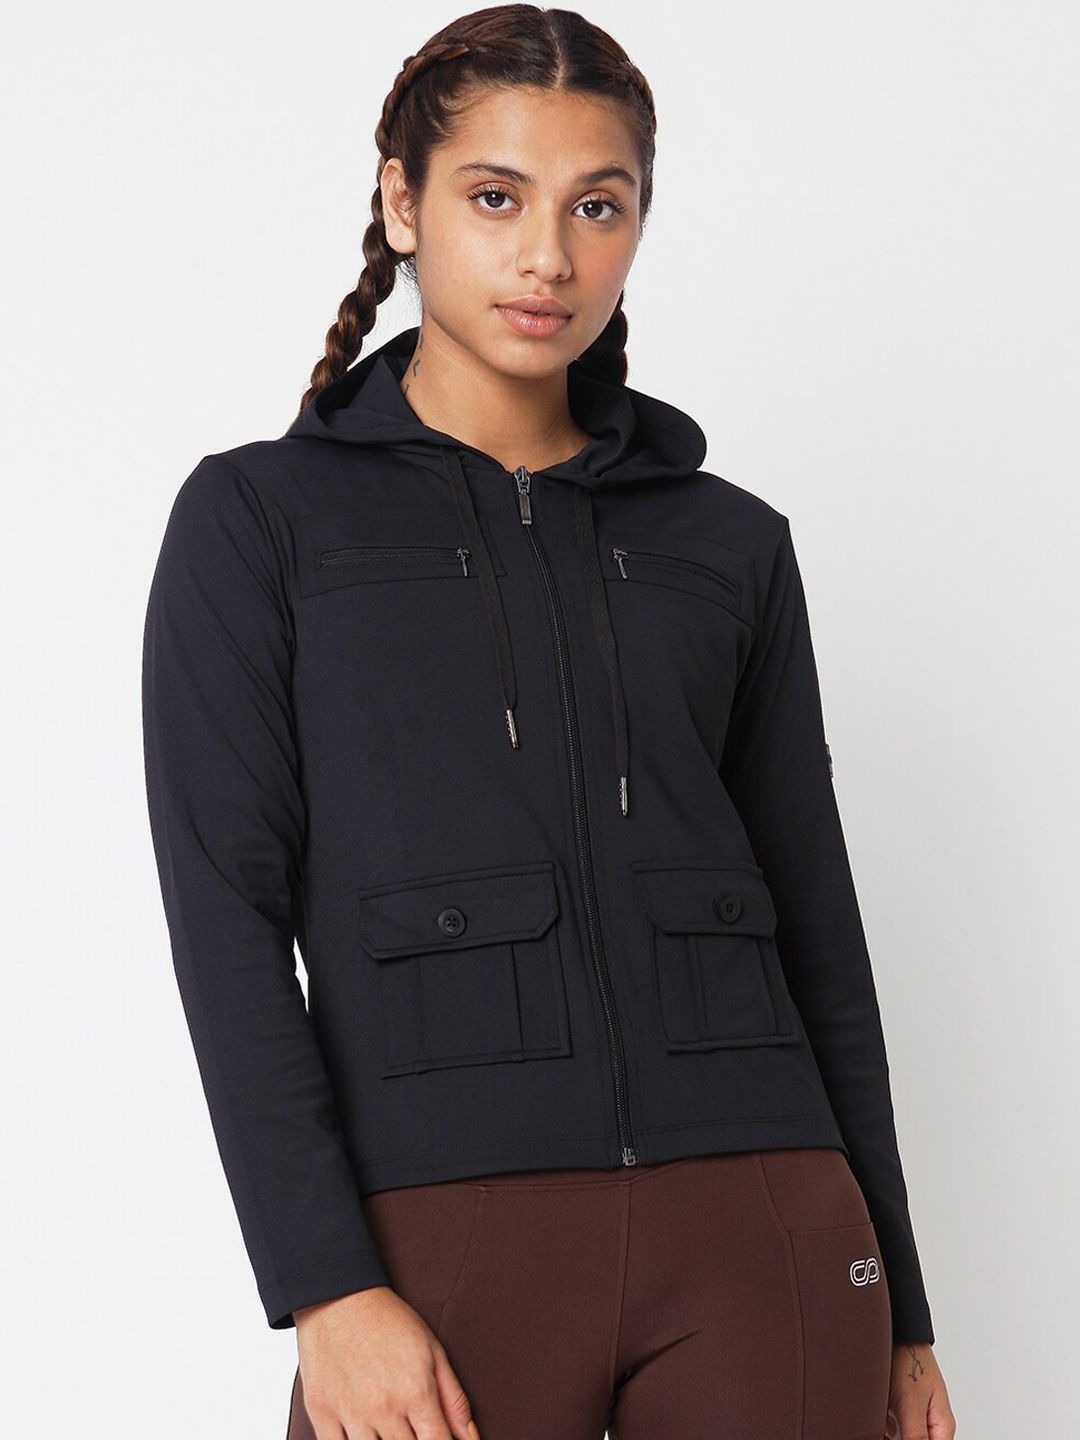 Silvertraq Women Black Tailored Hooded Jacket Price in India